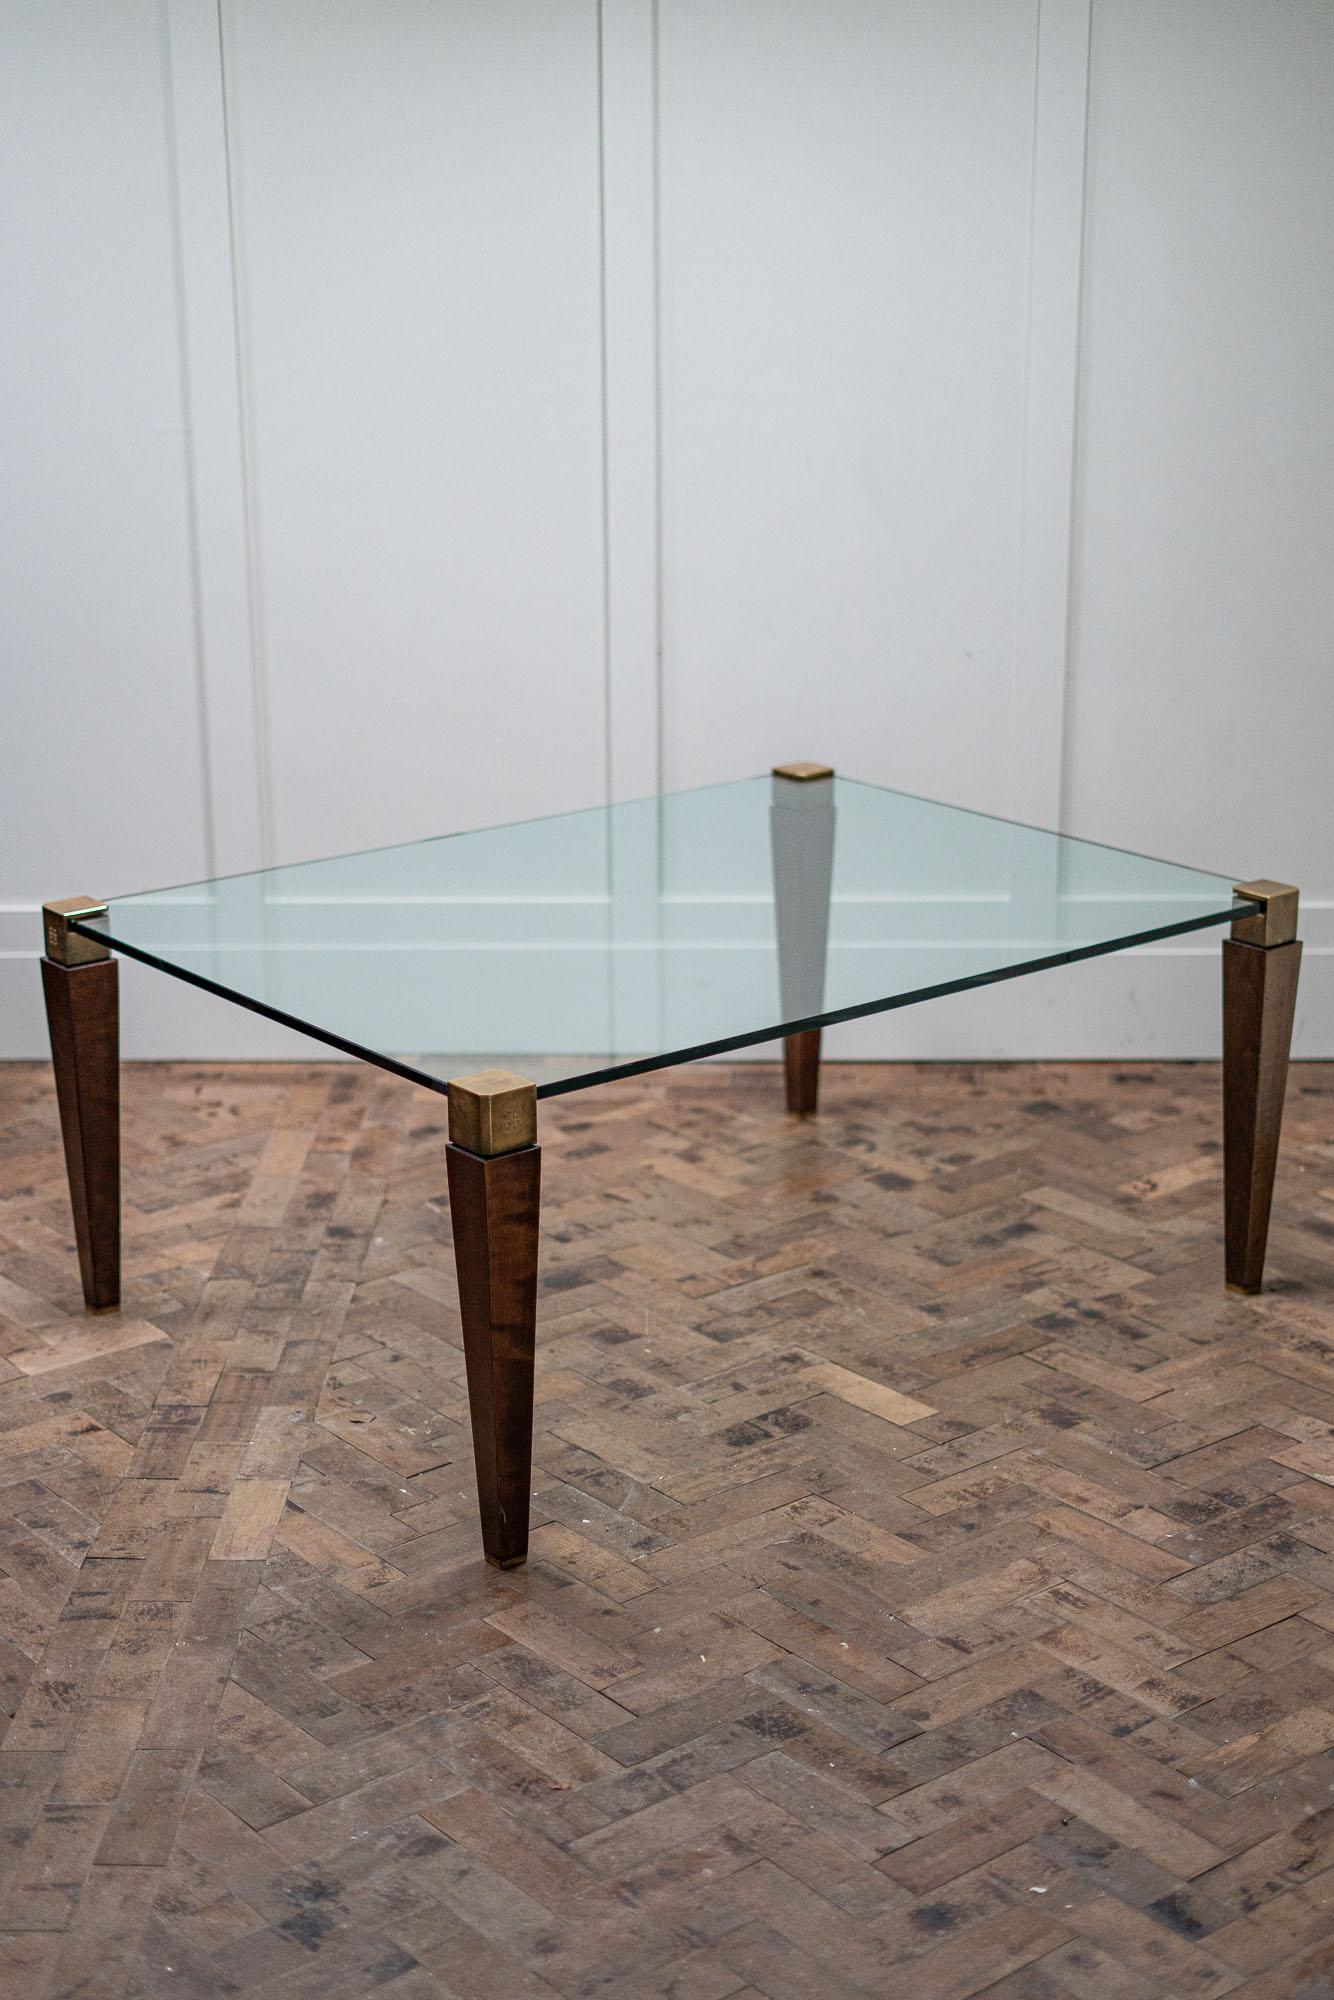 Peter Ghyczy T56 coffee table, 1990s. This table has brass and hard wood legs with 15ml toughened glass top.

The legs are cleverly designed to grab the glass and hold it in place which I believe was a design by Ghyczy.

Height - 52 cm
Length -